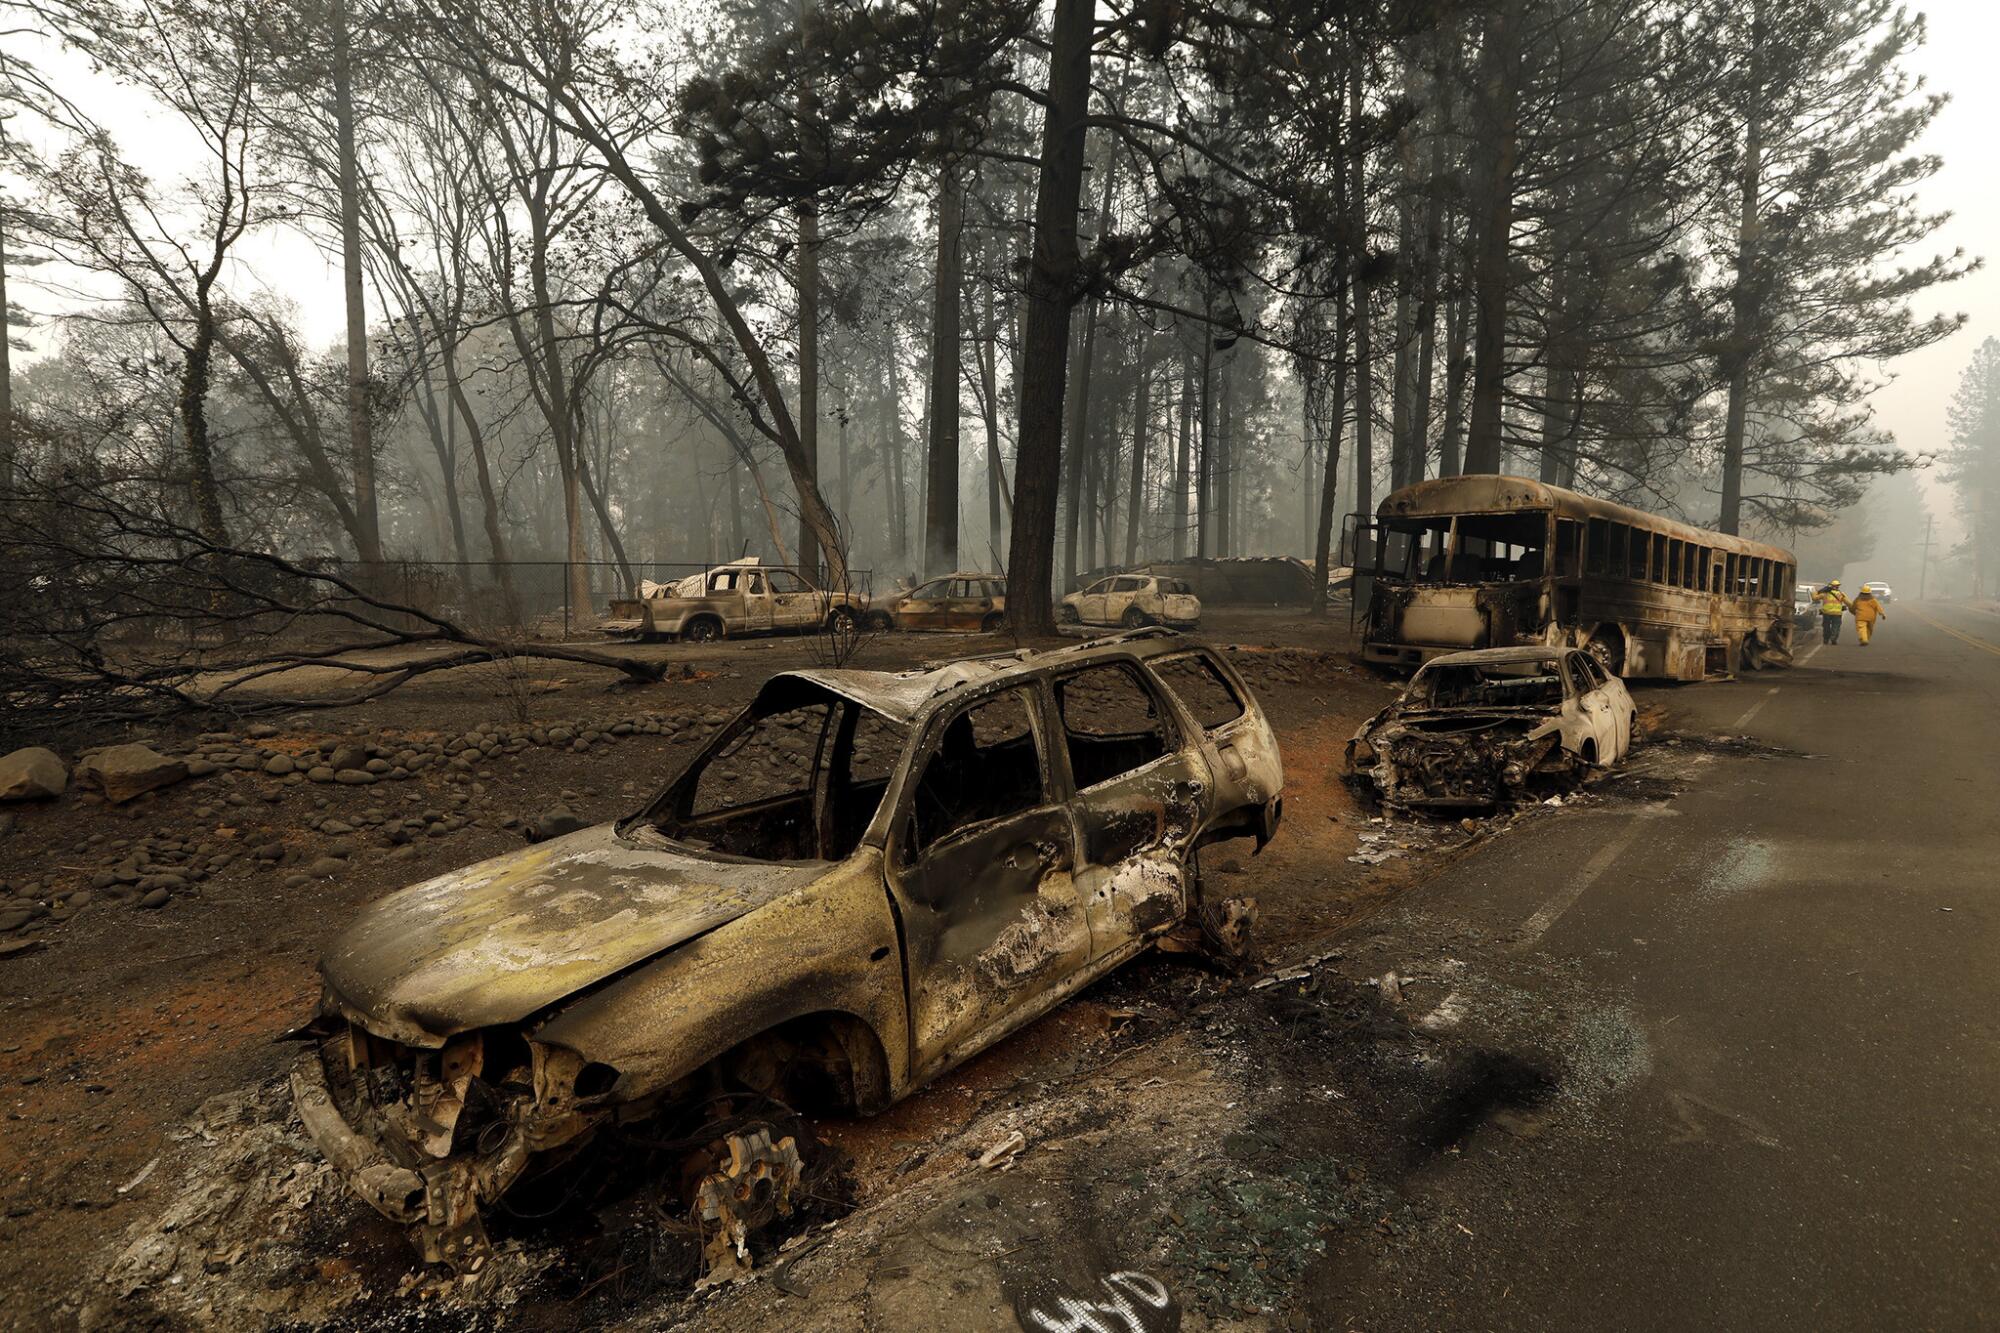 Damage from the Camp fire